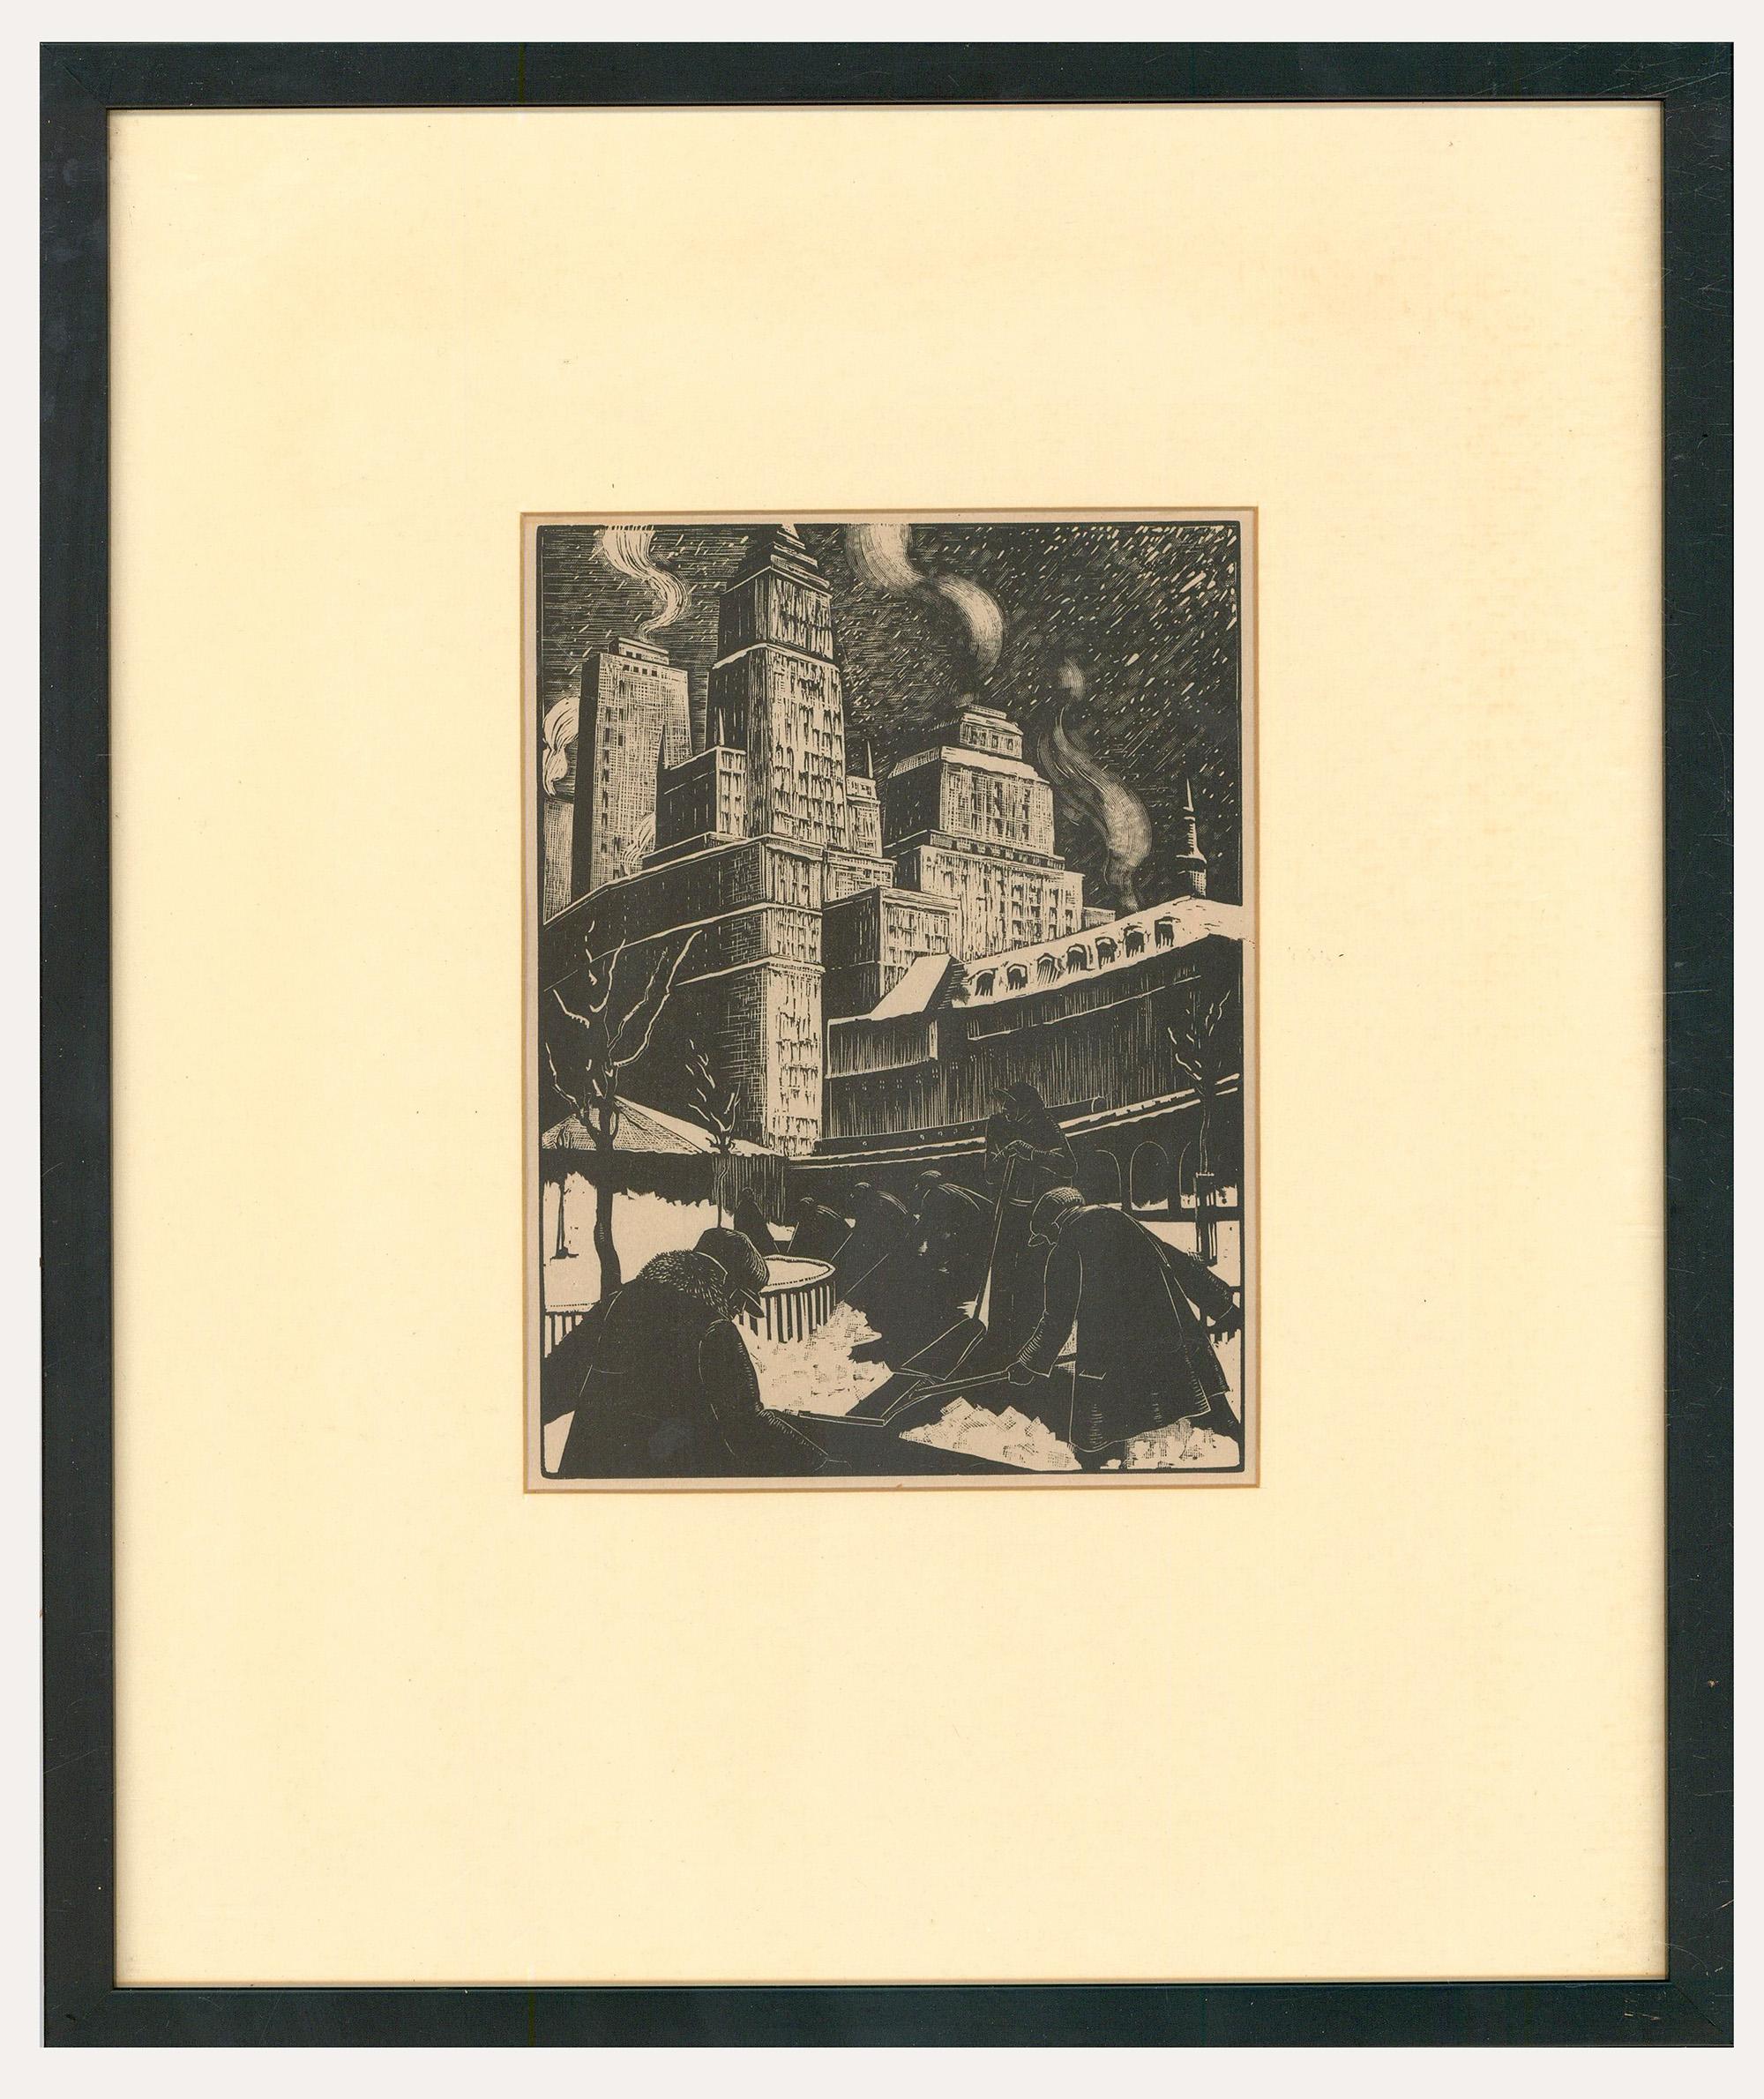 A striking illustrative print by the collectable English/American artist Clare Leighton (1898-1989). Taken from the artist's original woodblock series and printed for publication. Smartly mount in a fine black frame. Unsigned. On paper.